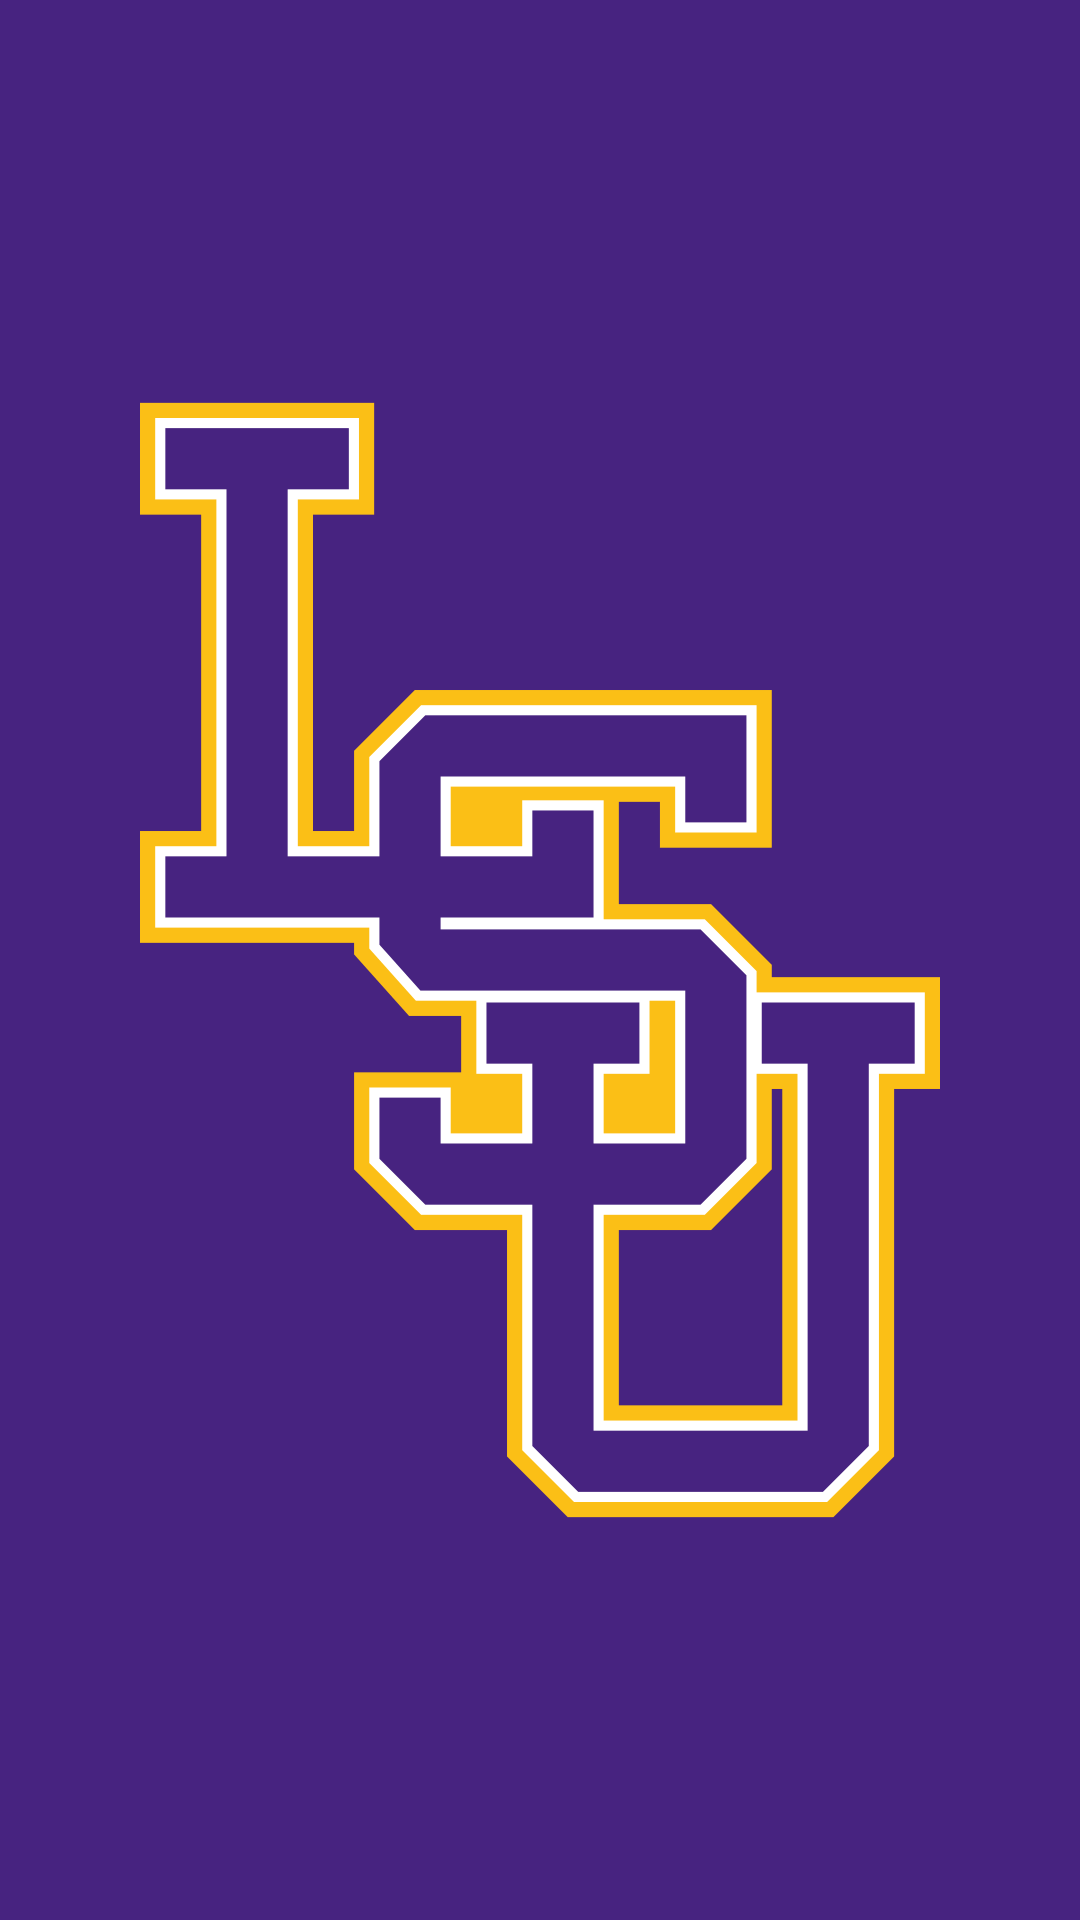 Lsu Live Free Wallpapers